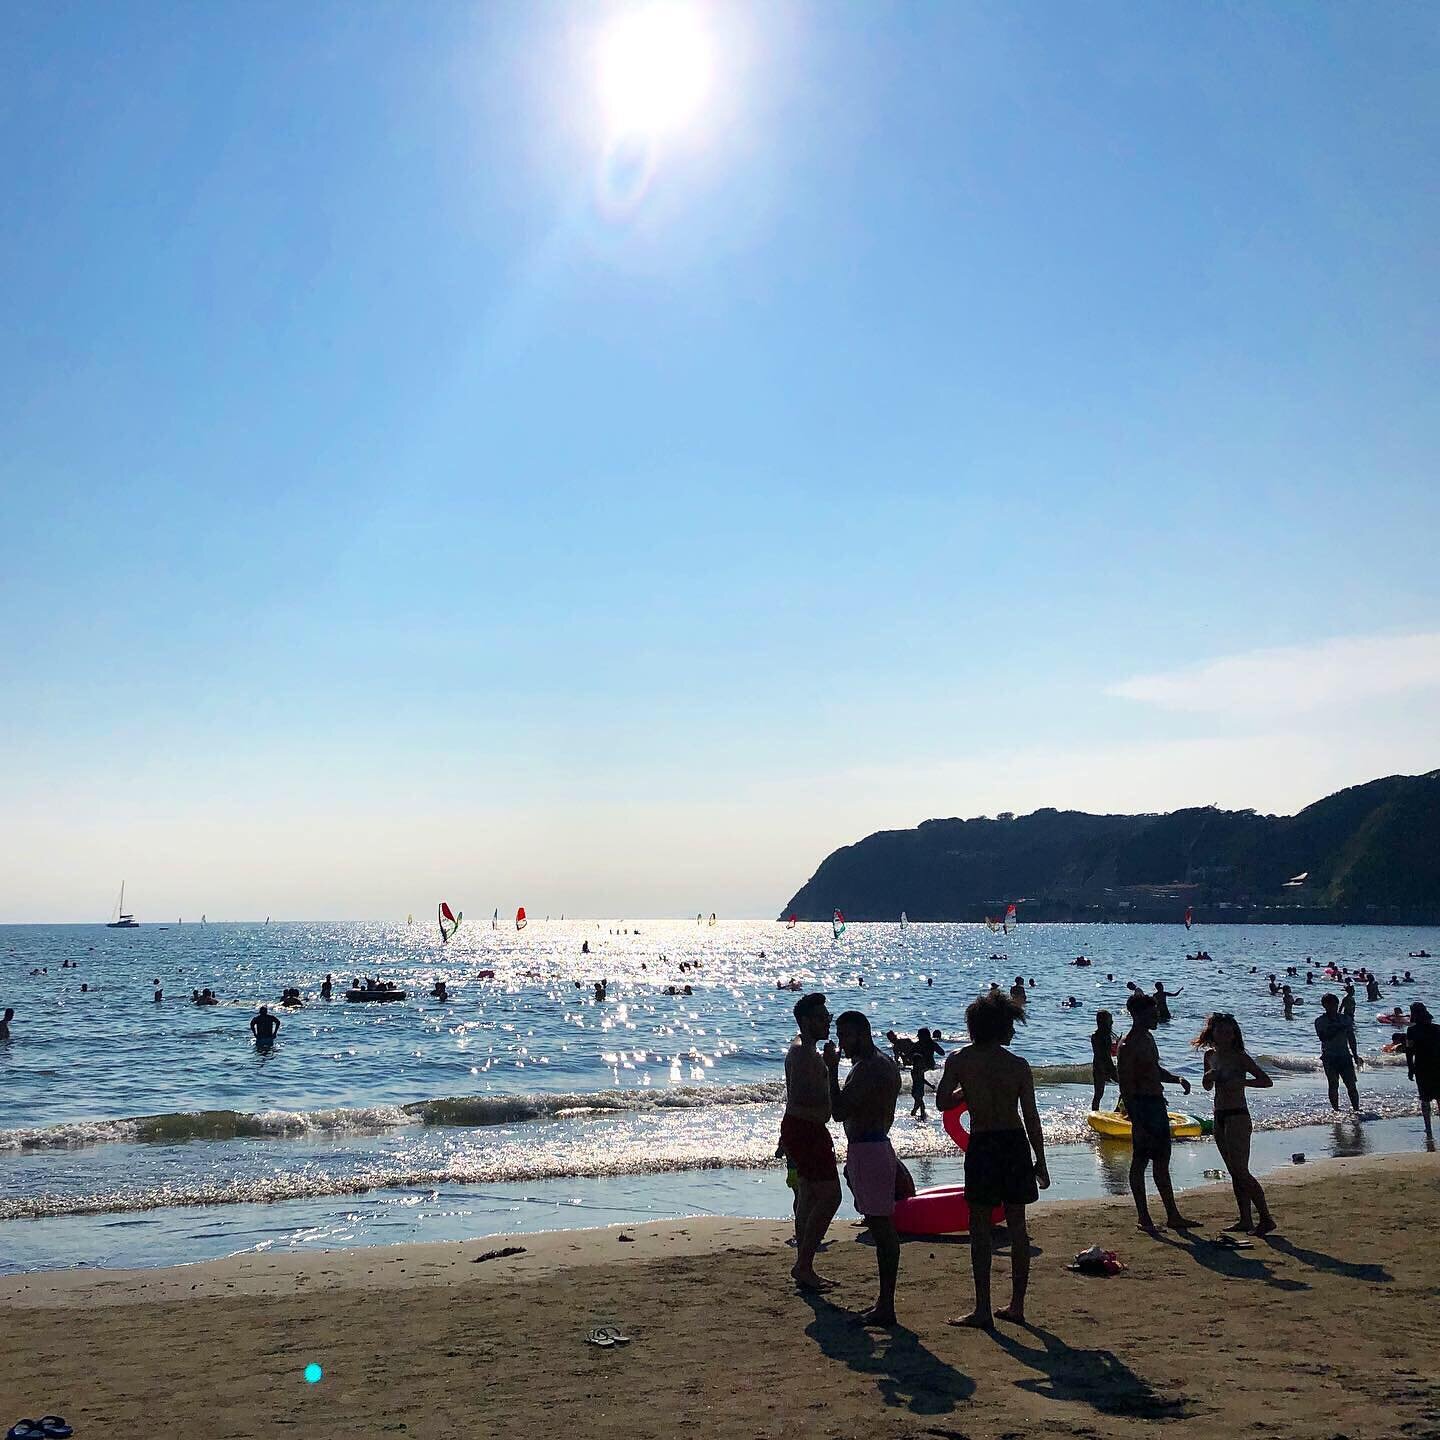 Did you know that there are spectacular beaches just an hour outside of central Tokyo? In the summer, they lined with stalls of bars and restaurants all serving up good vibes, tunes, and company. If you&rsquo;re lucky, you&rsquo;ll even get to experi